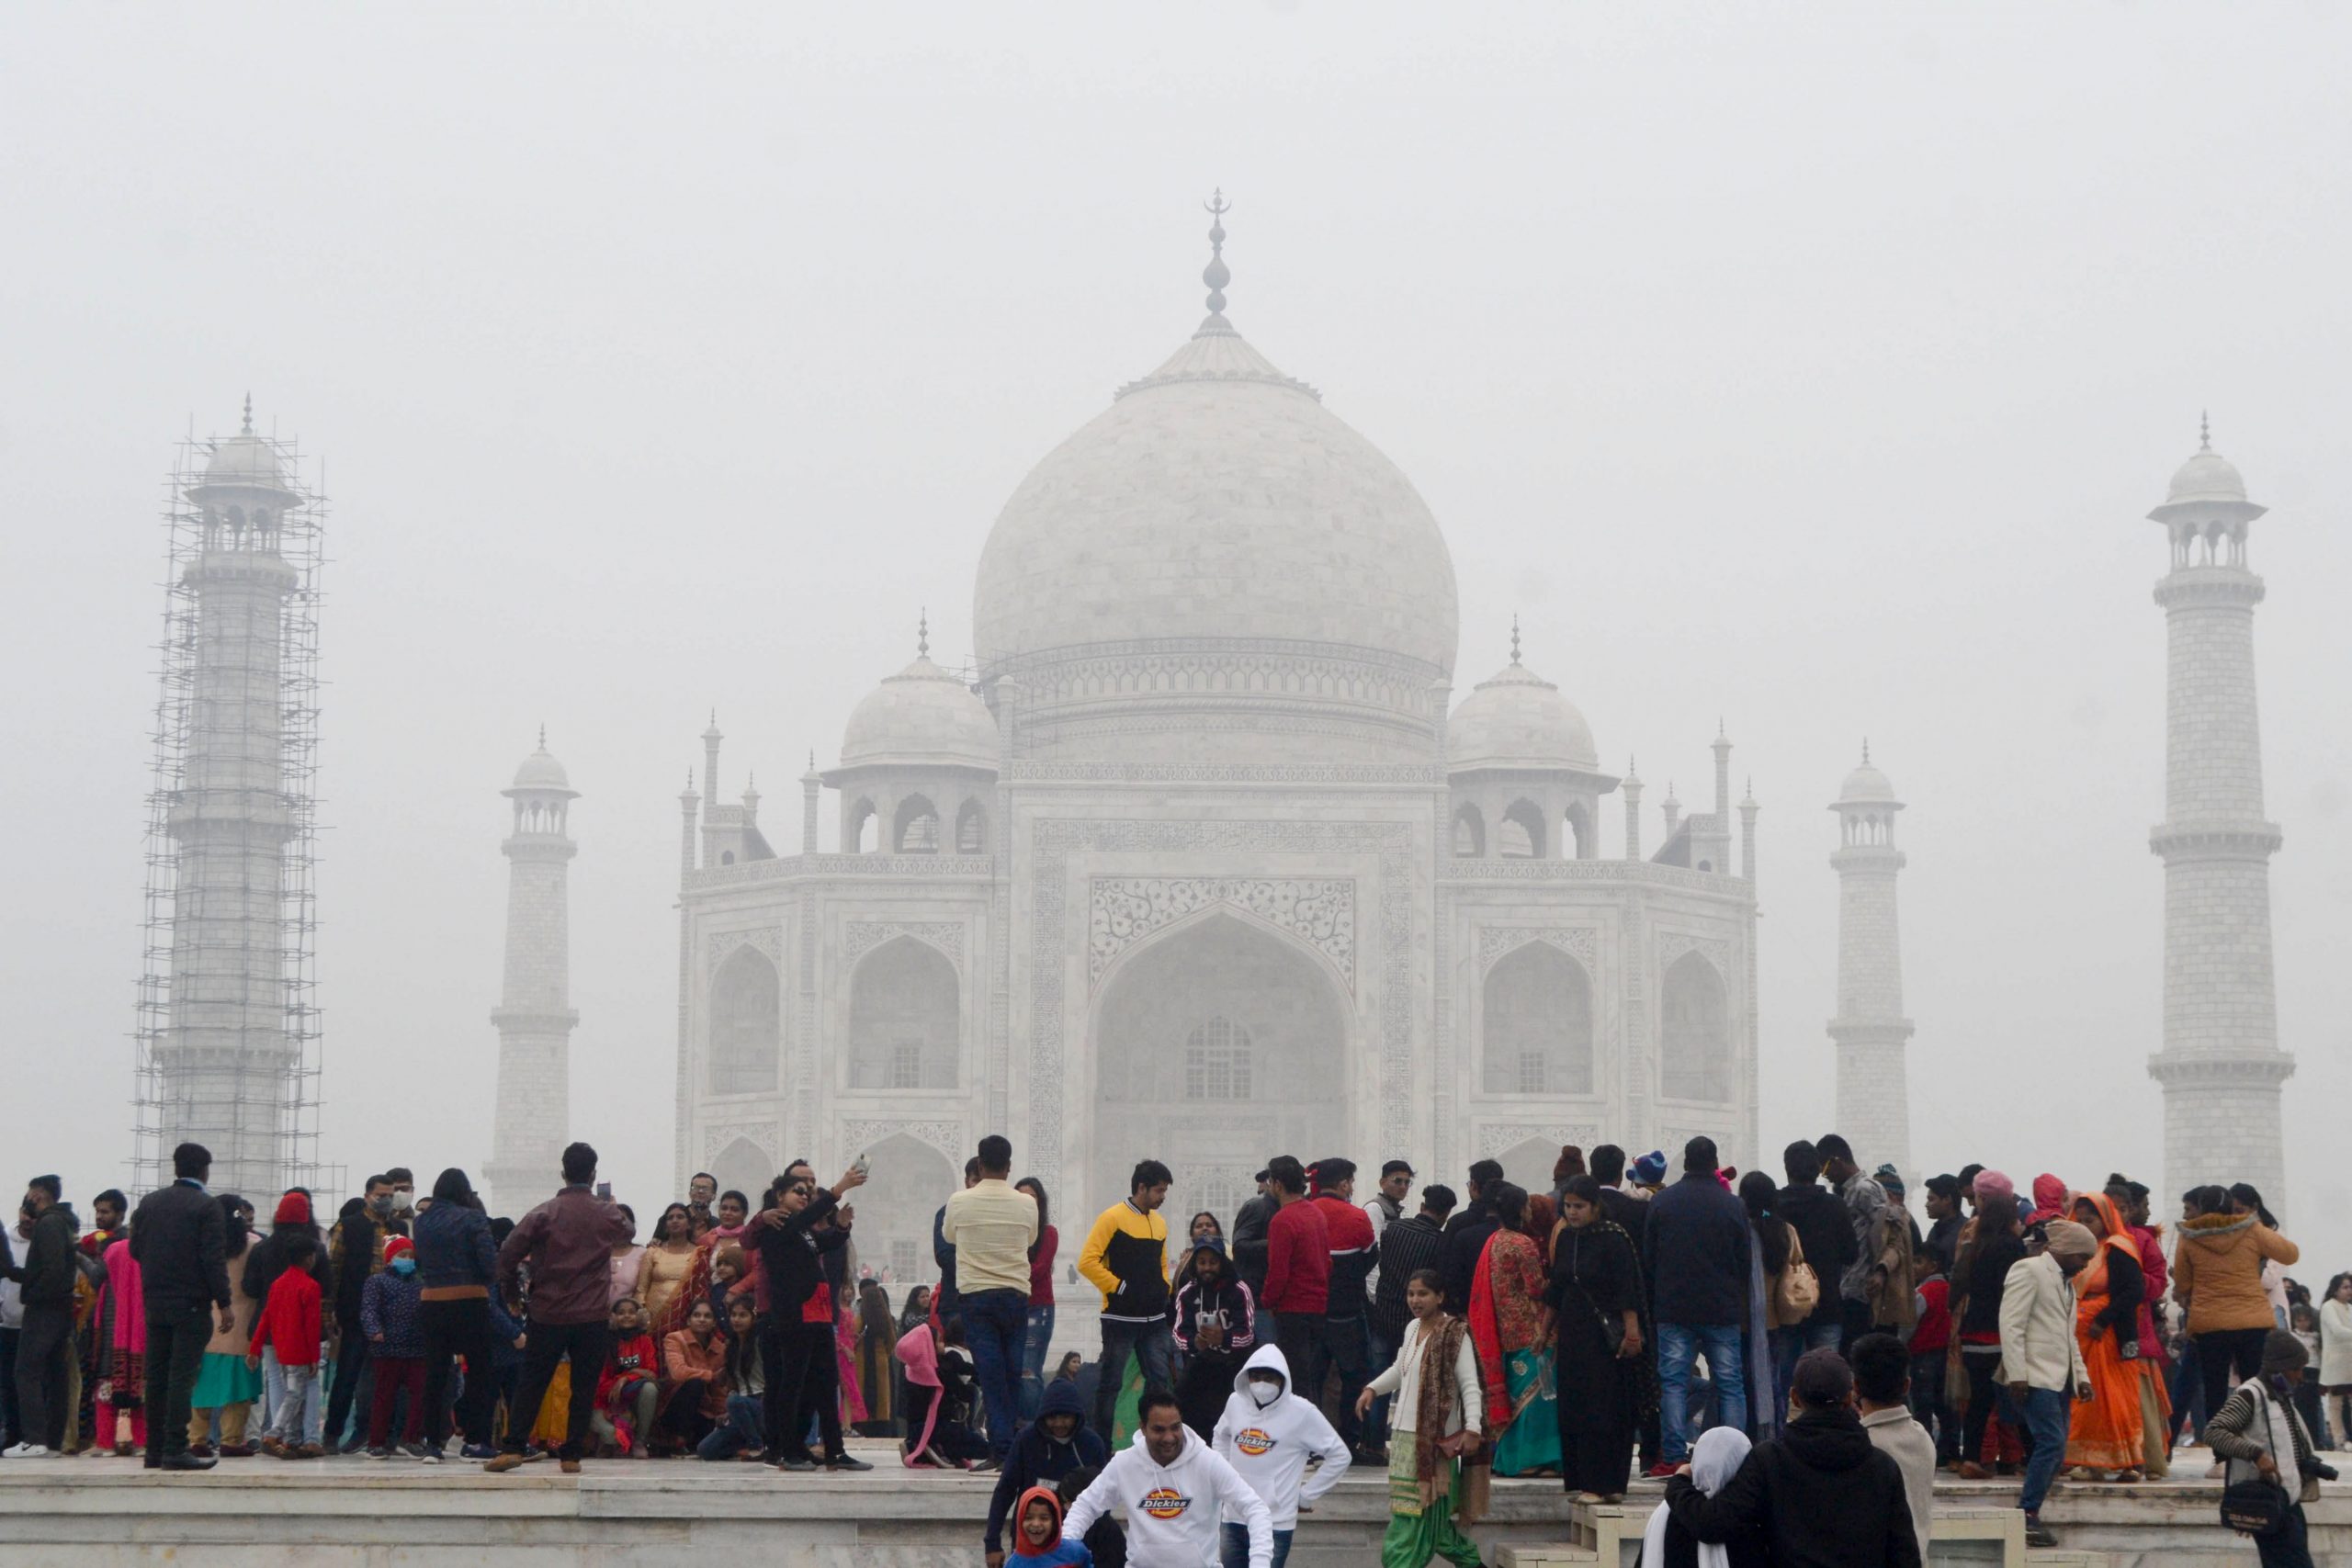 Taj Mahal evacuated after bomb threat, call turns out to be hoax